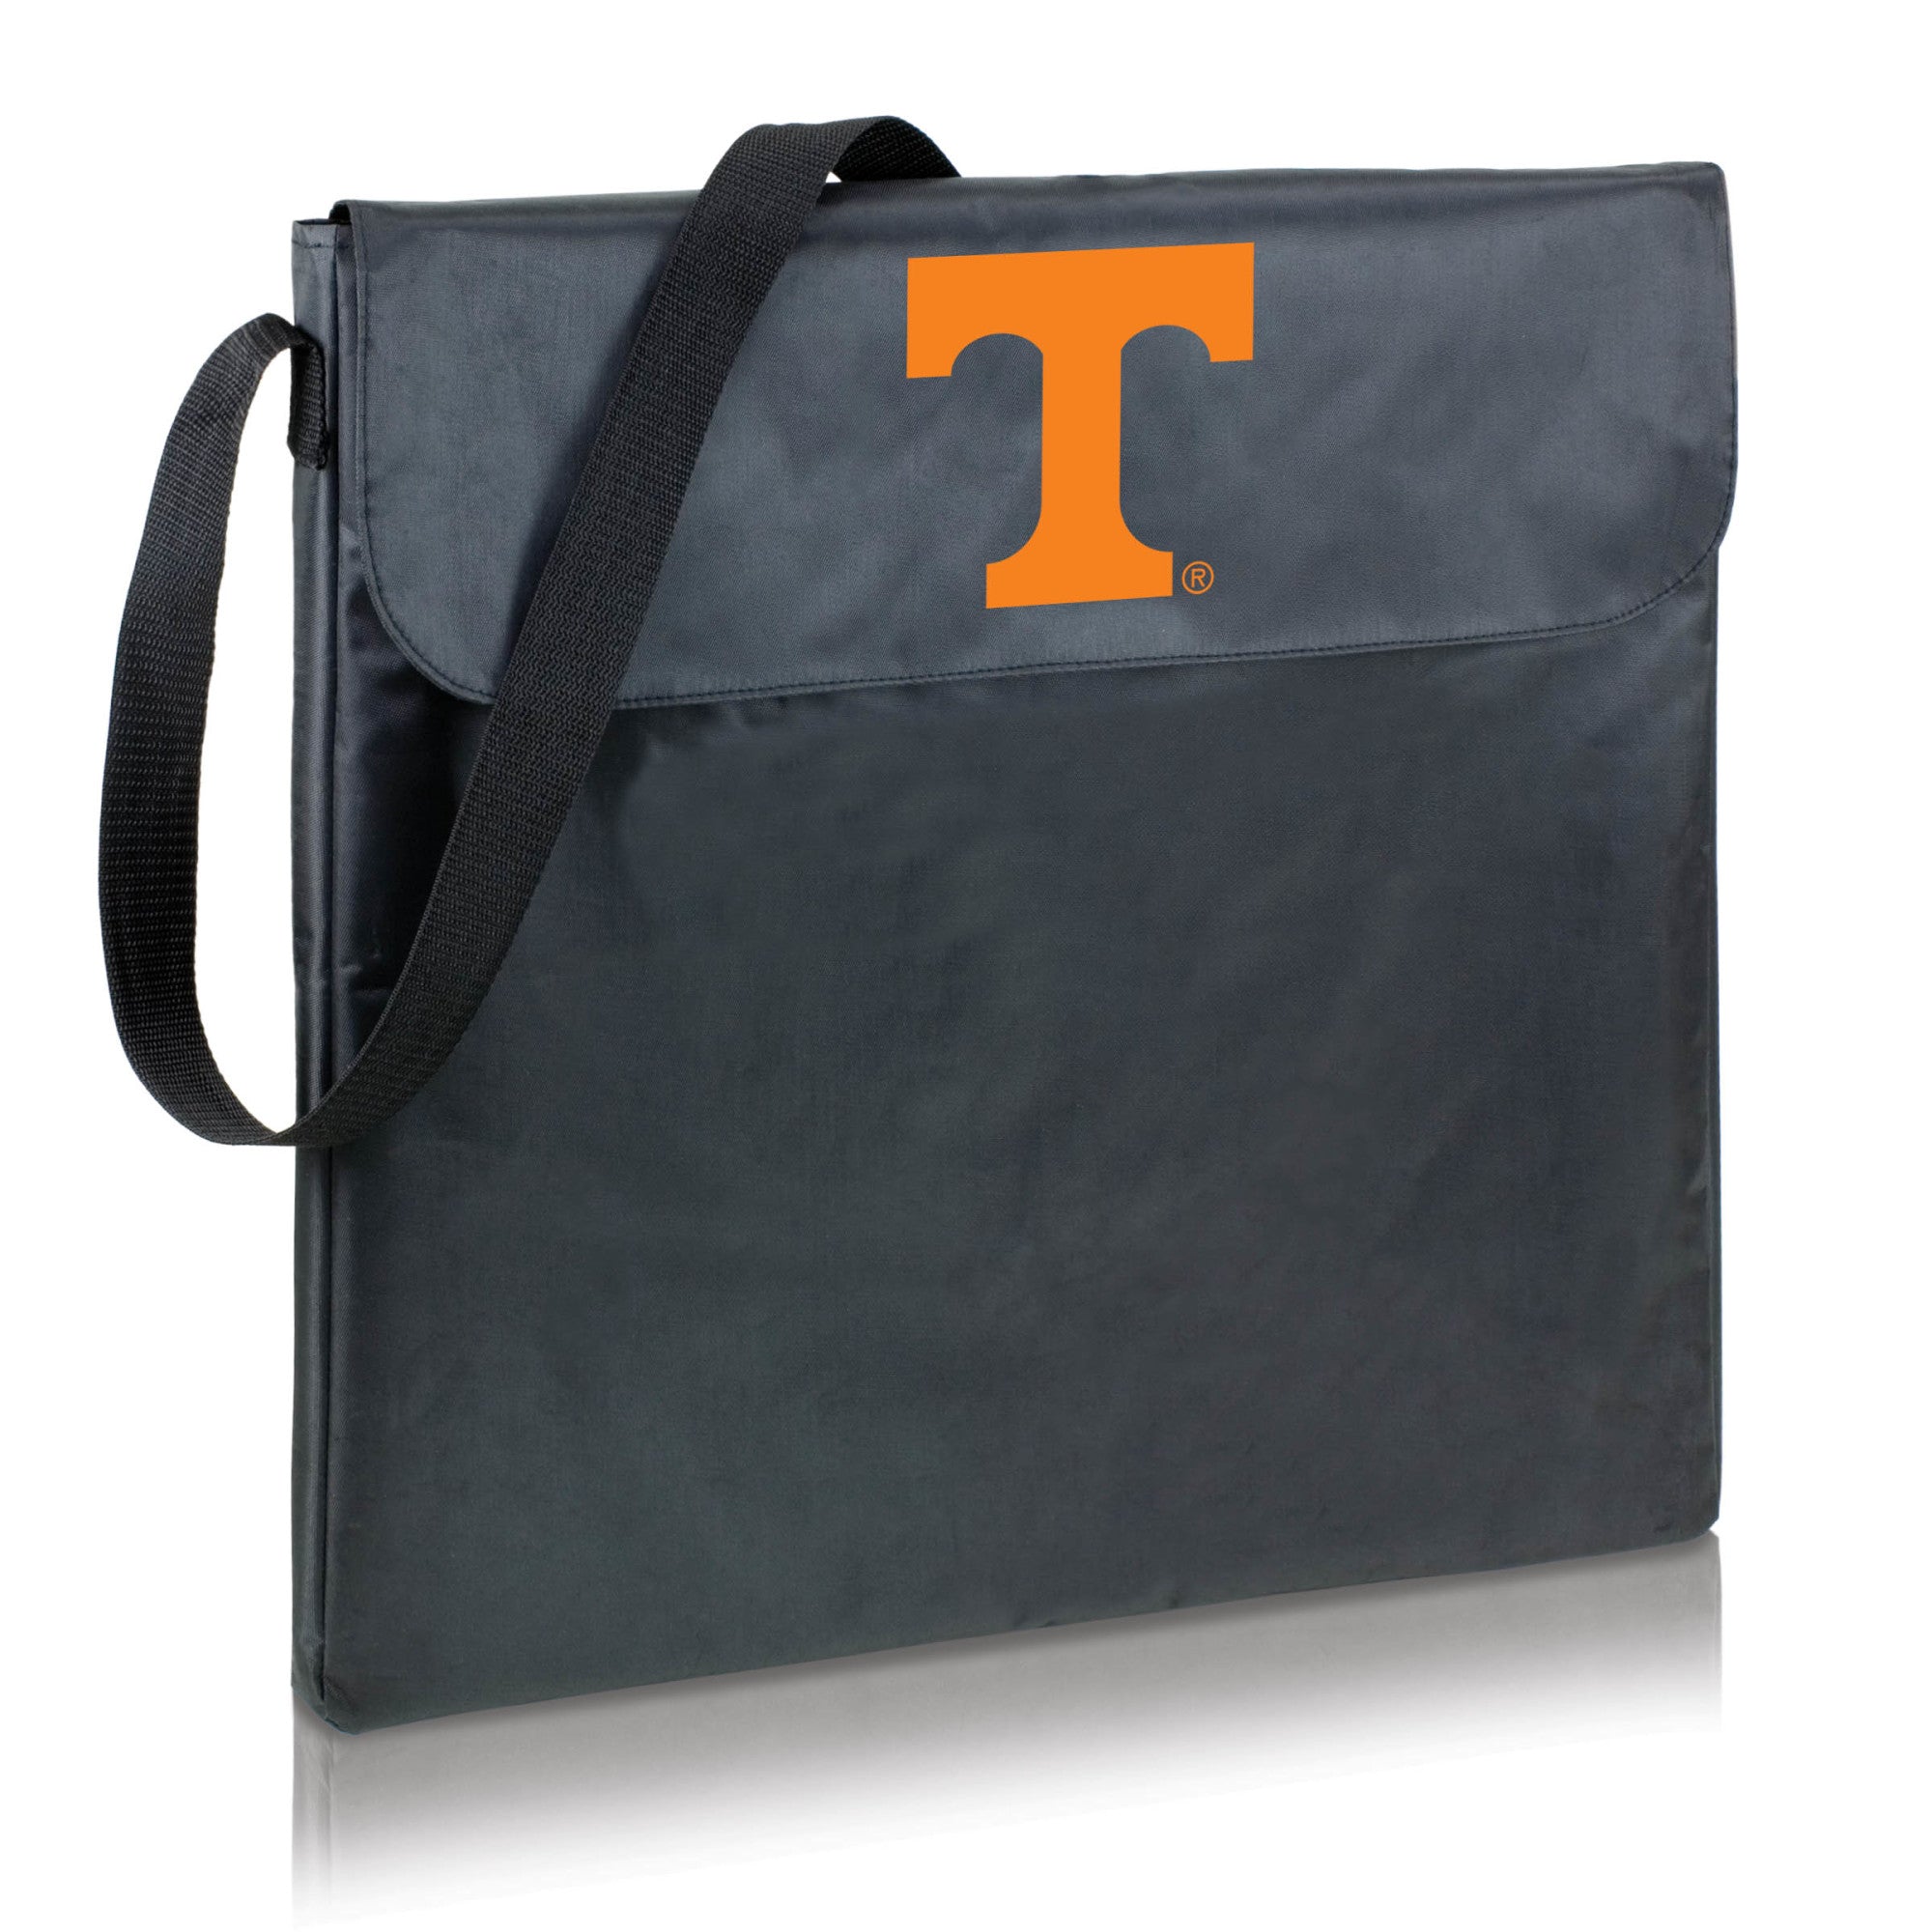 Tennessee Volunteers - X-Grill Portable Charcoal BBQ Grill